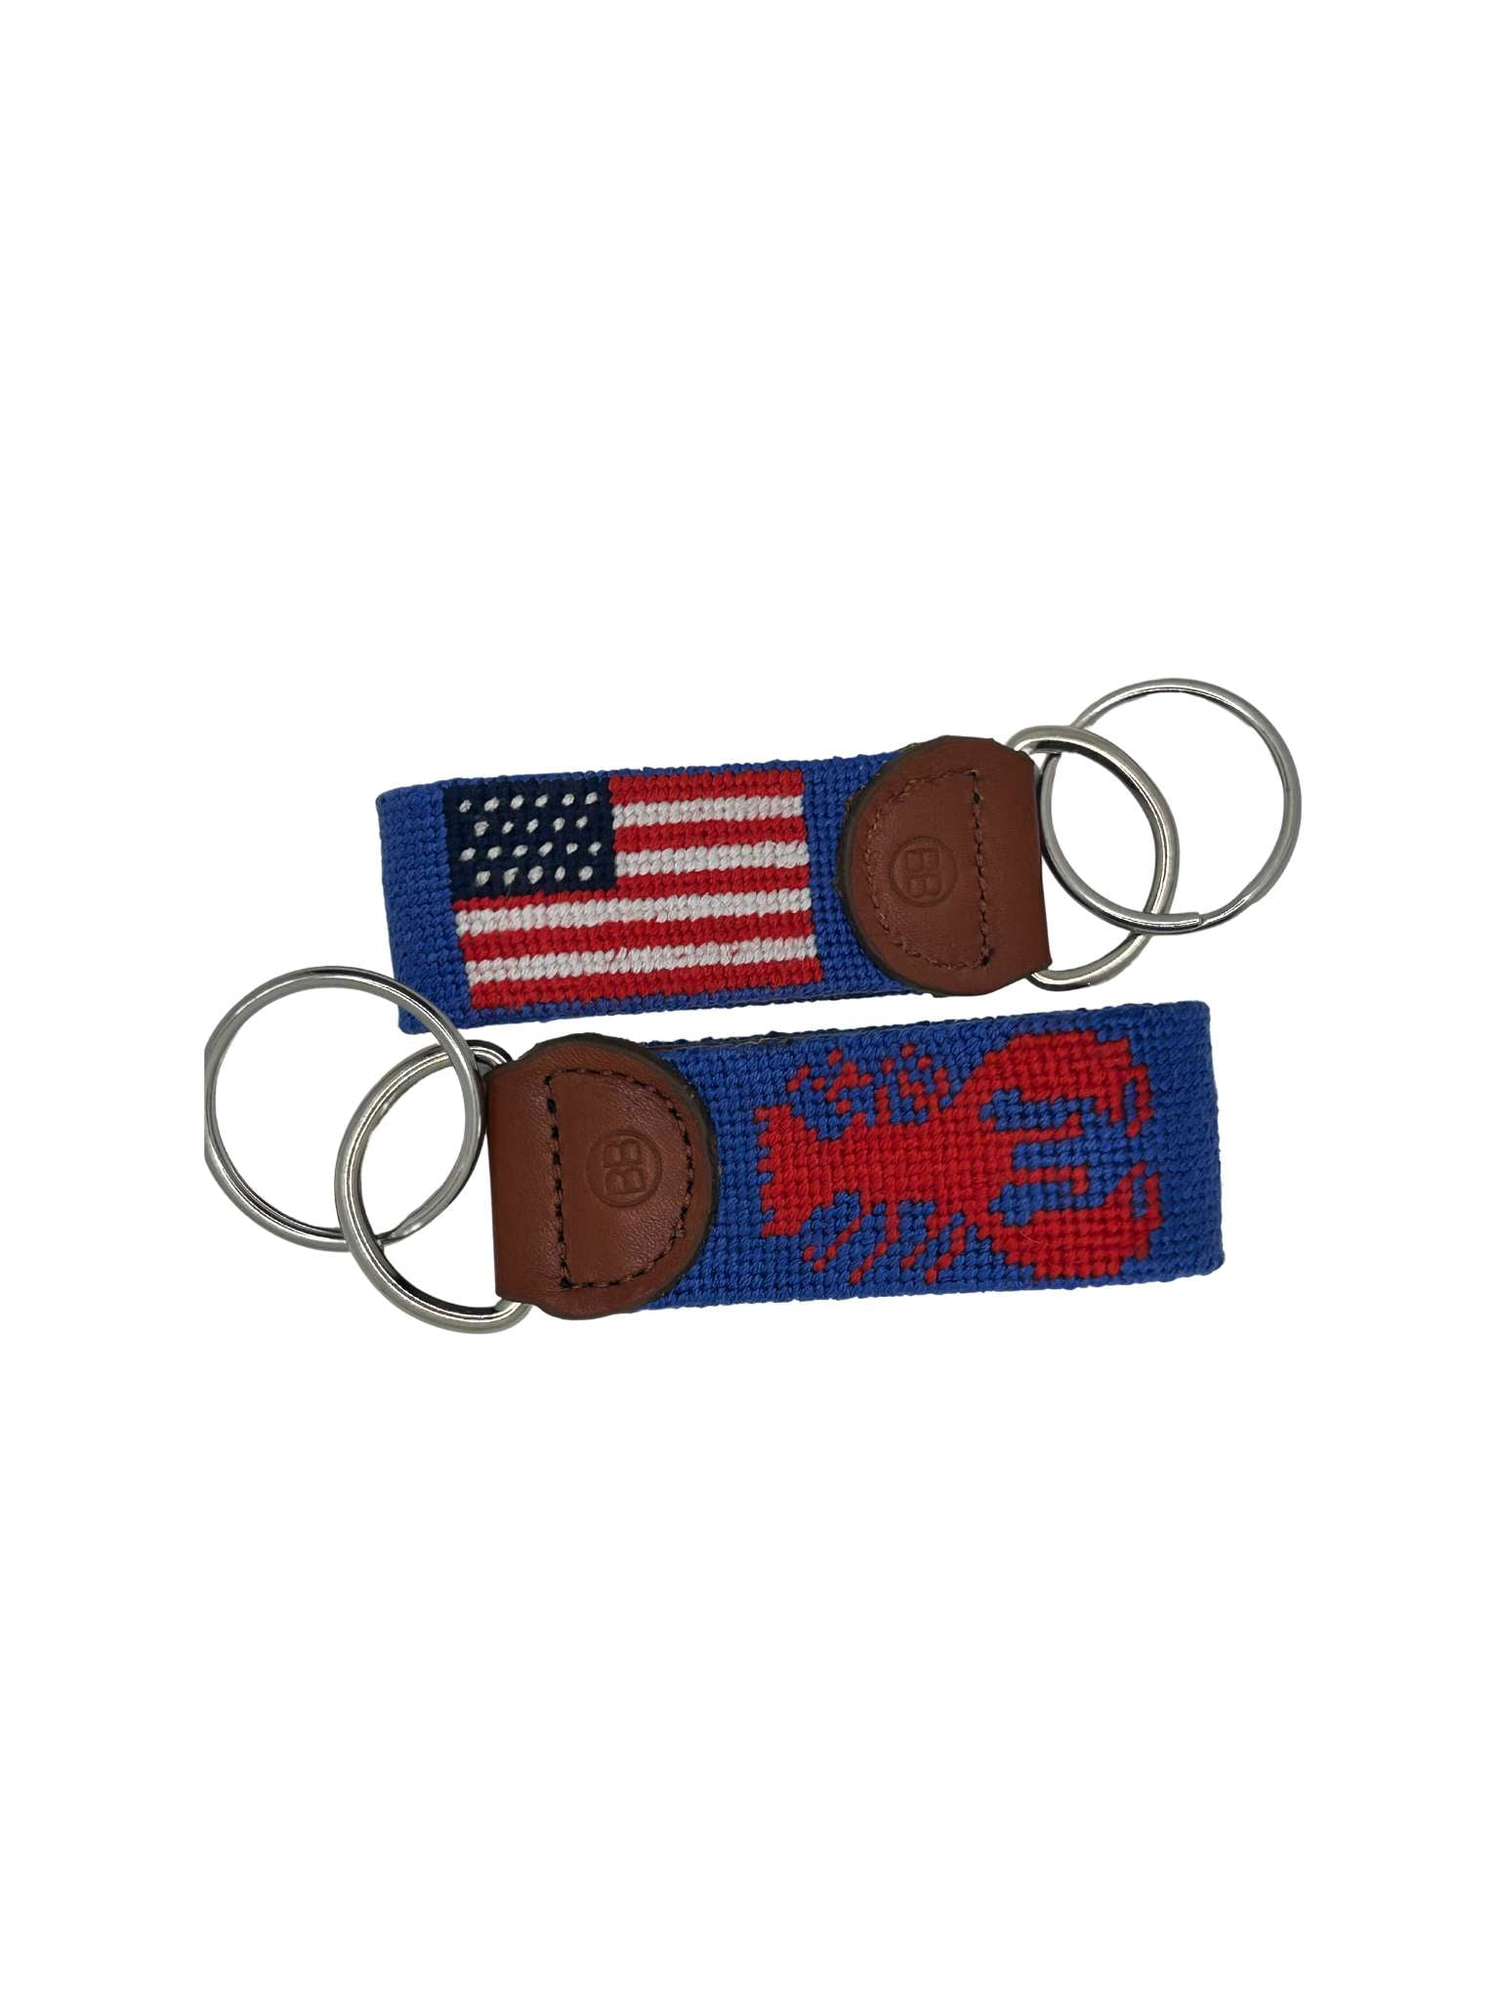 Needlepoint Key Fob- Lobster and American Flag Design key ring